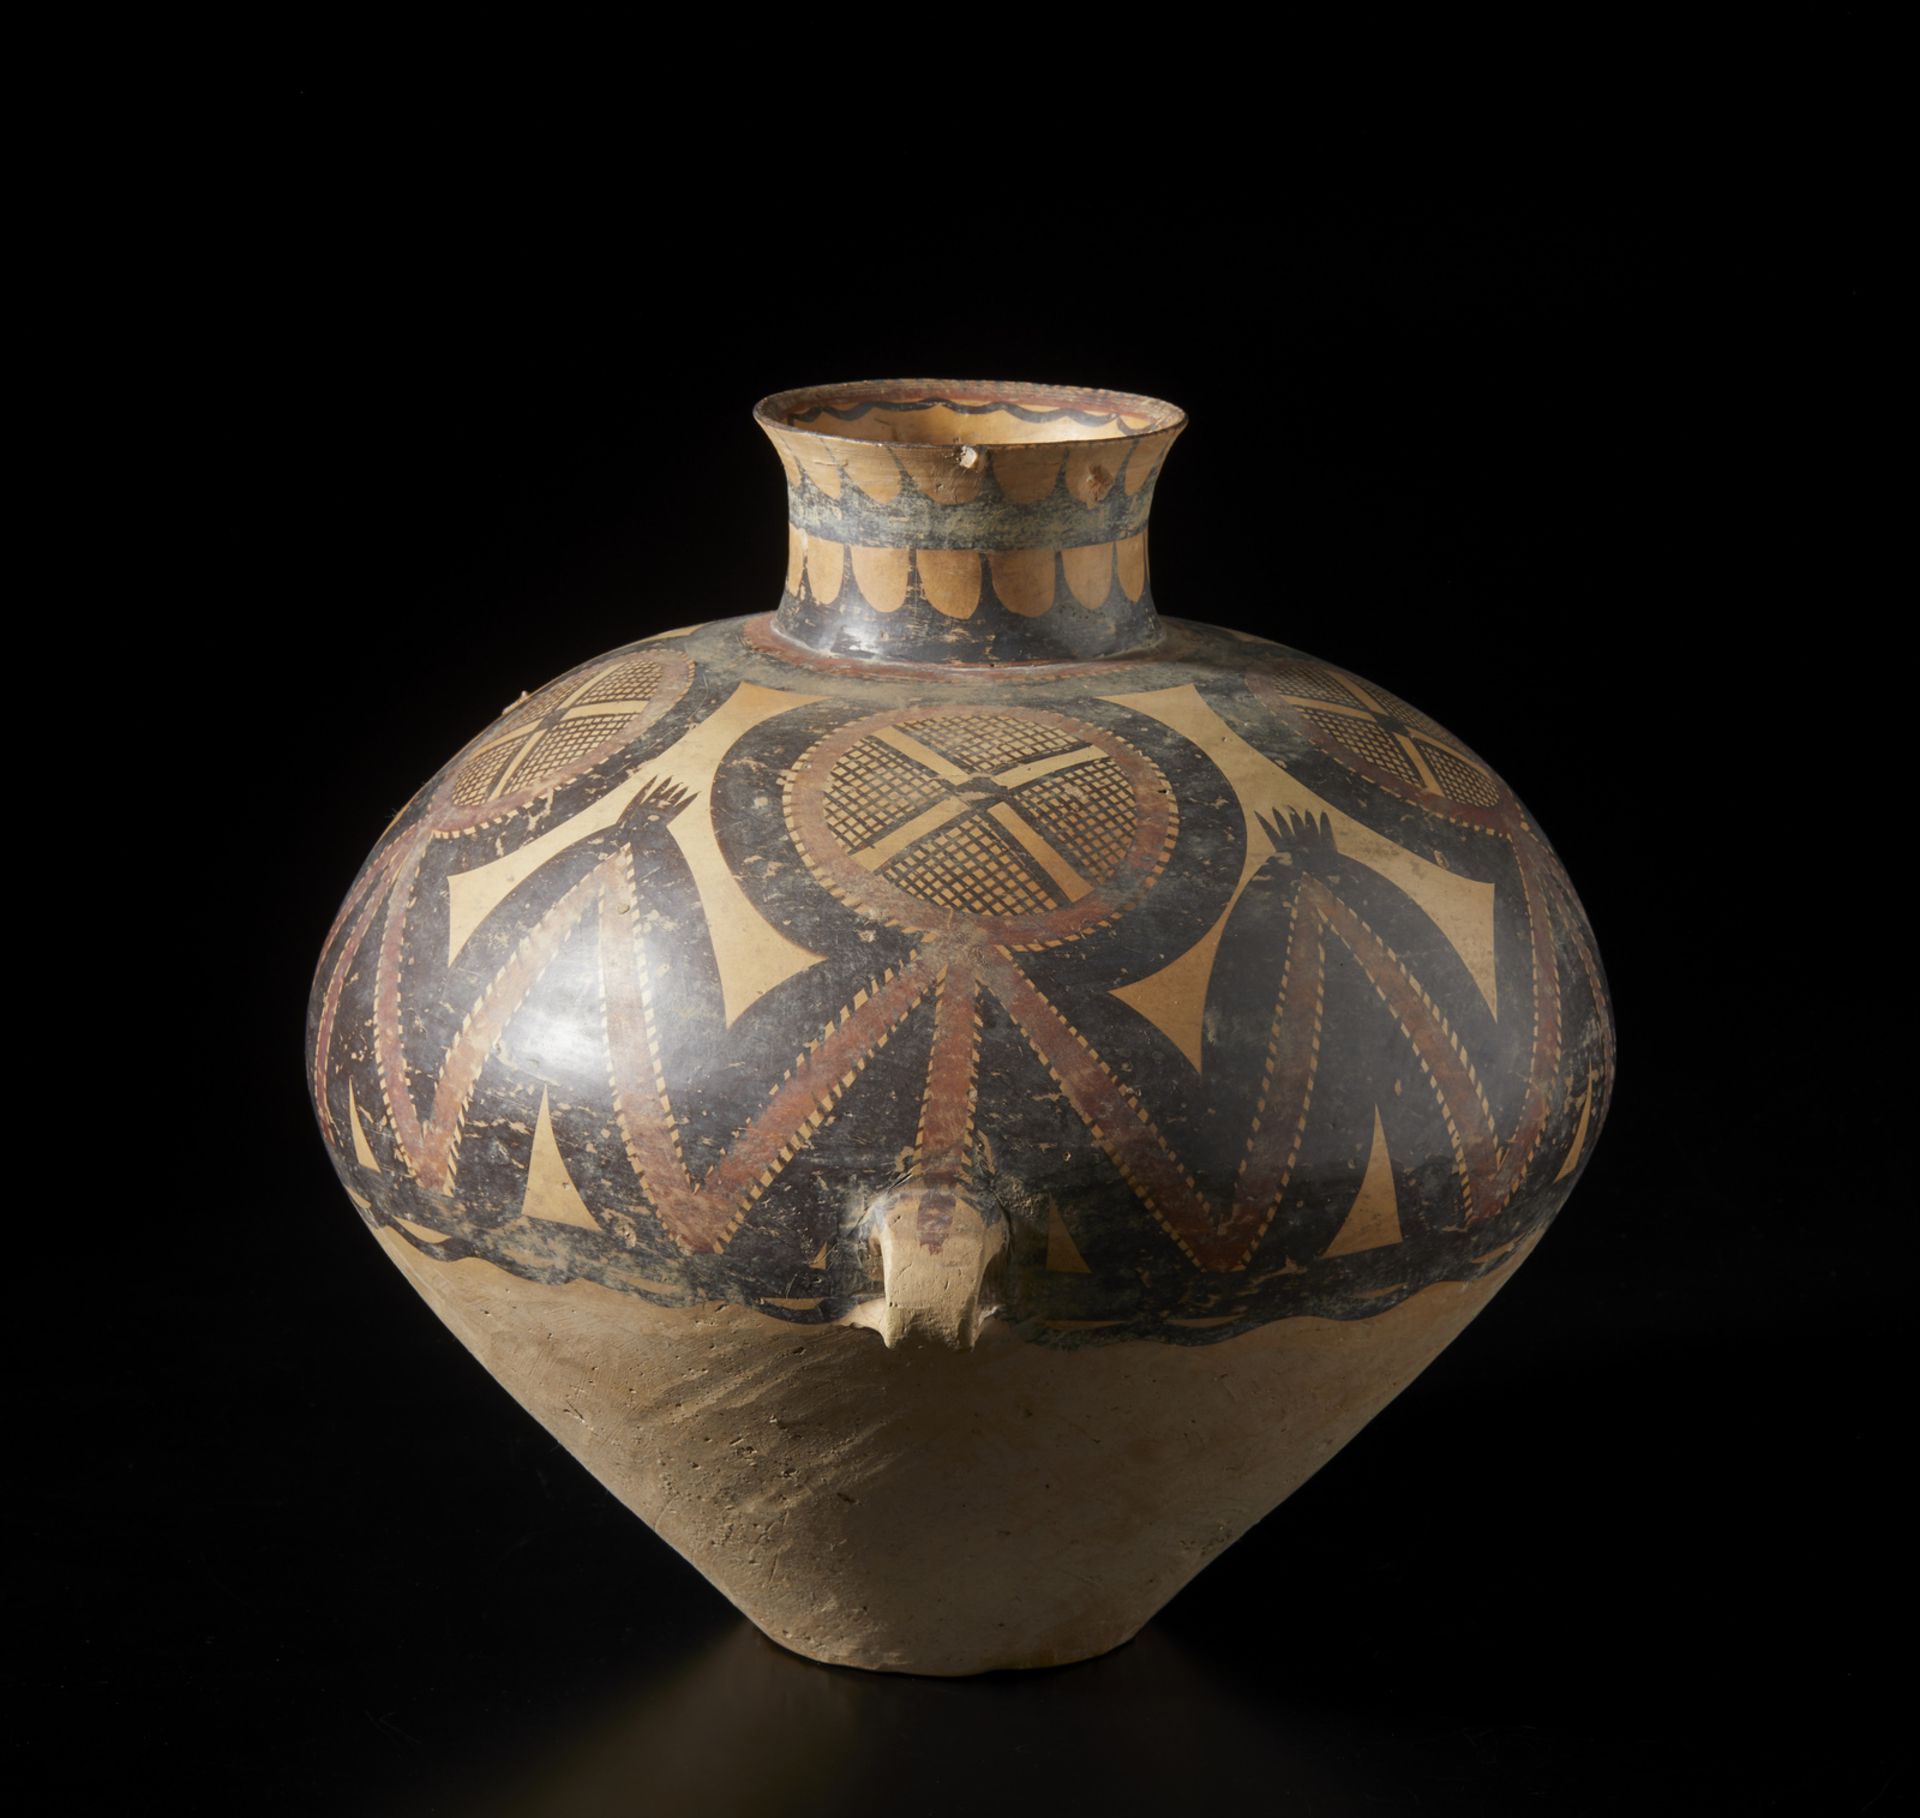 A terracotta jar with abstract and geometric decoration China, Neolithic period Cm 38,00 x 34,00 - Image 2 of 5